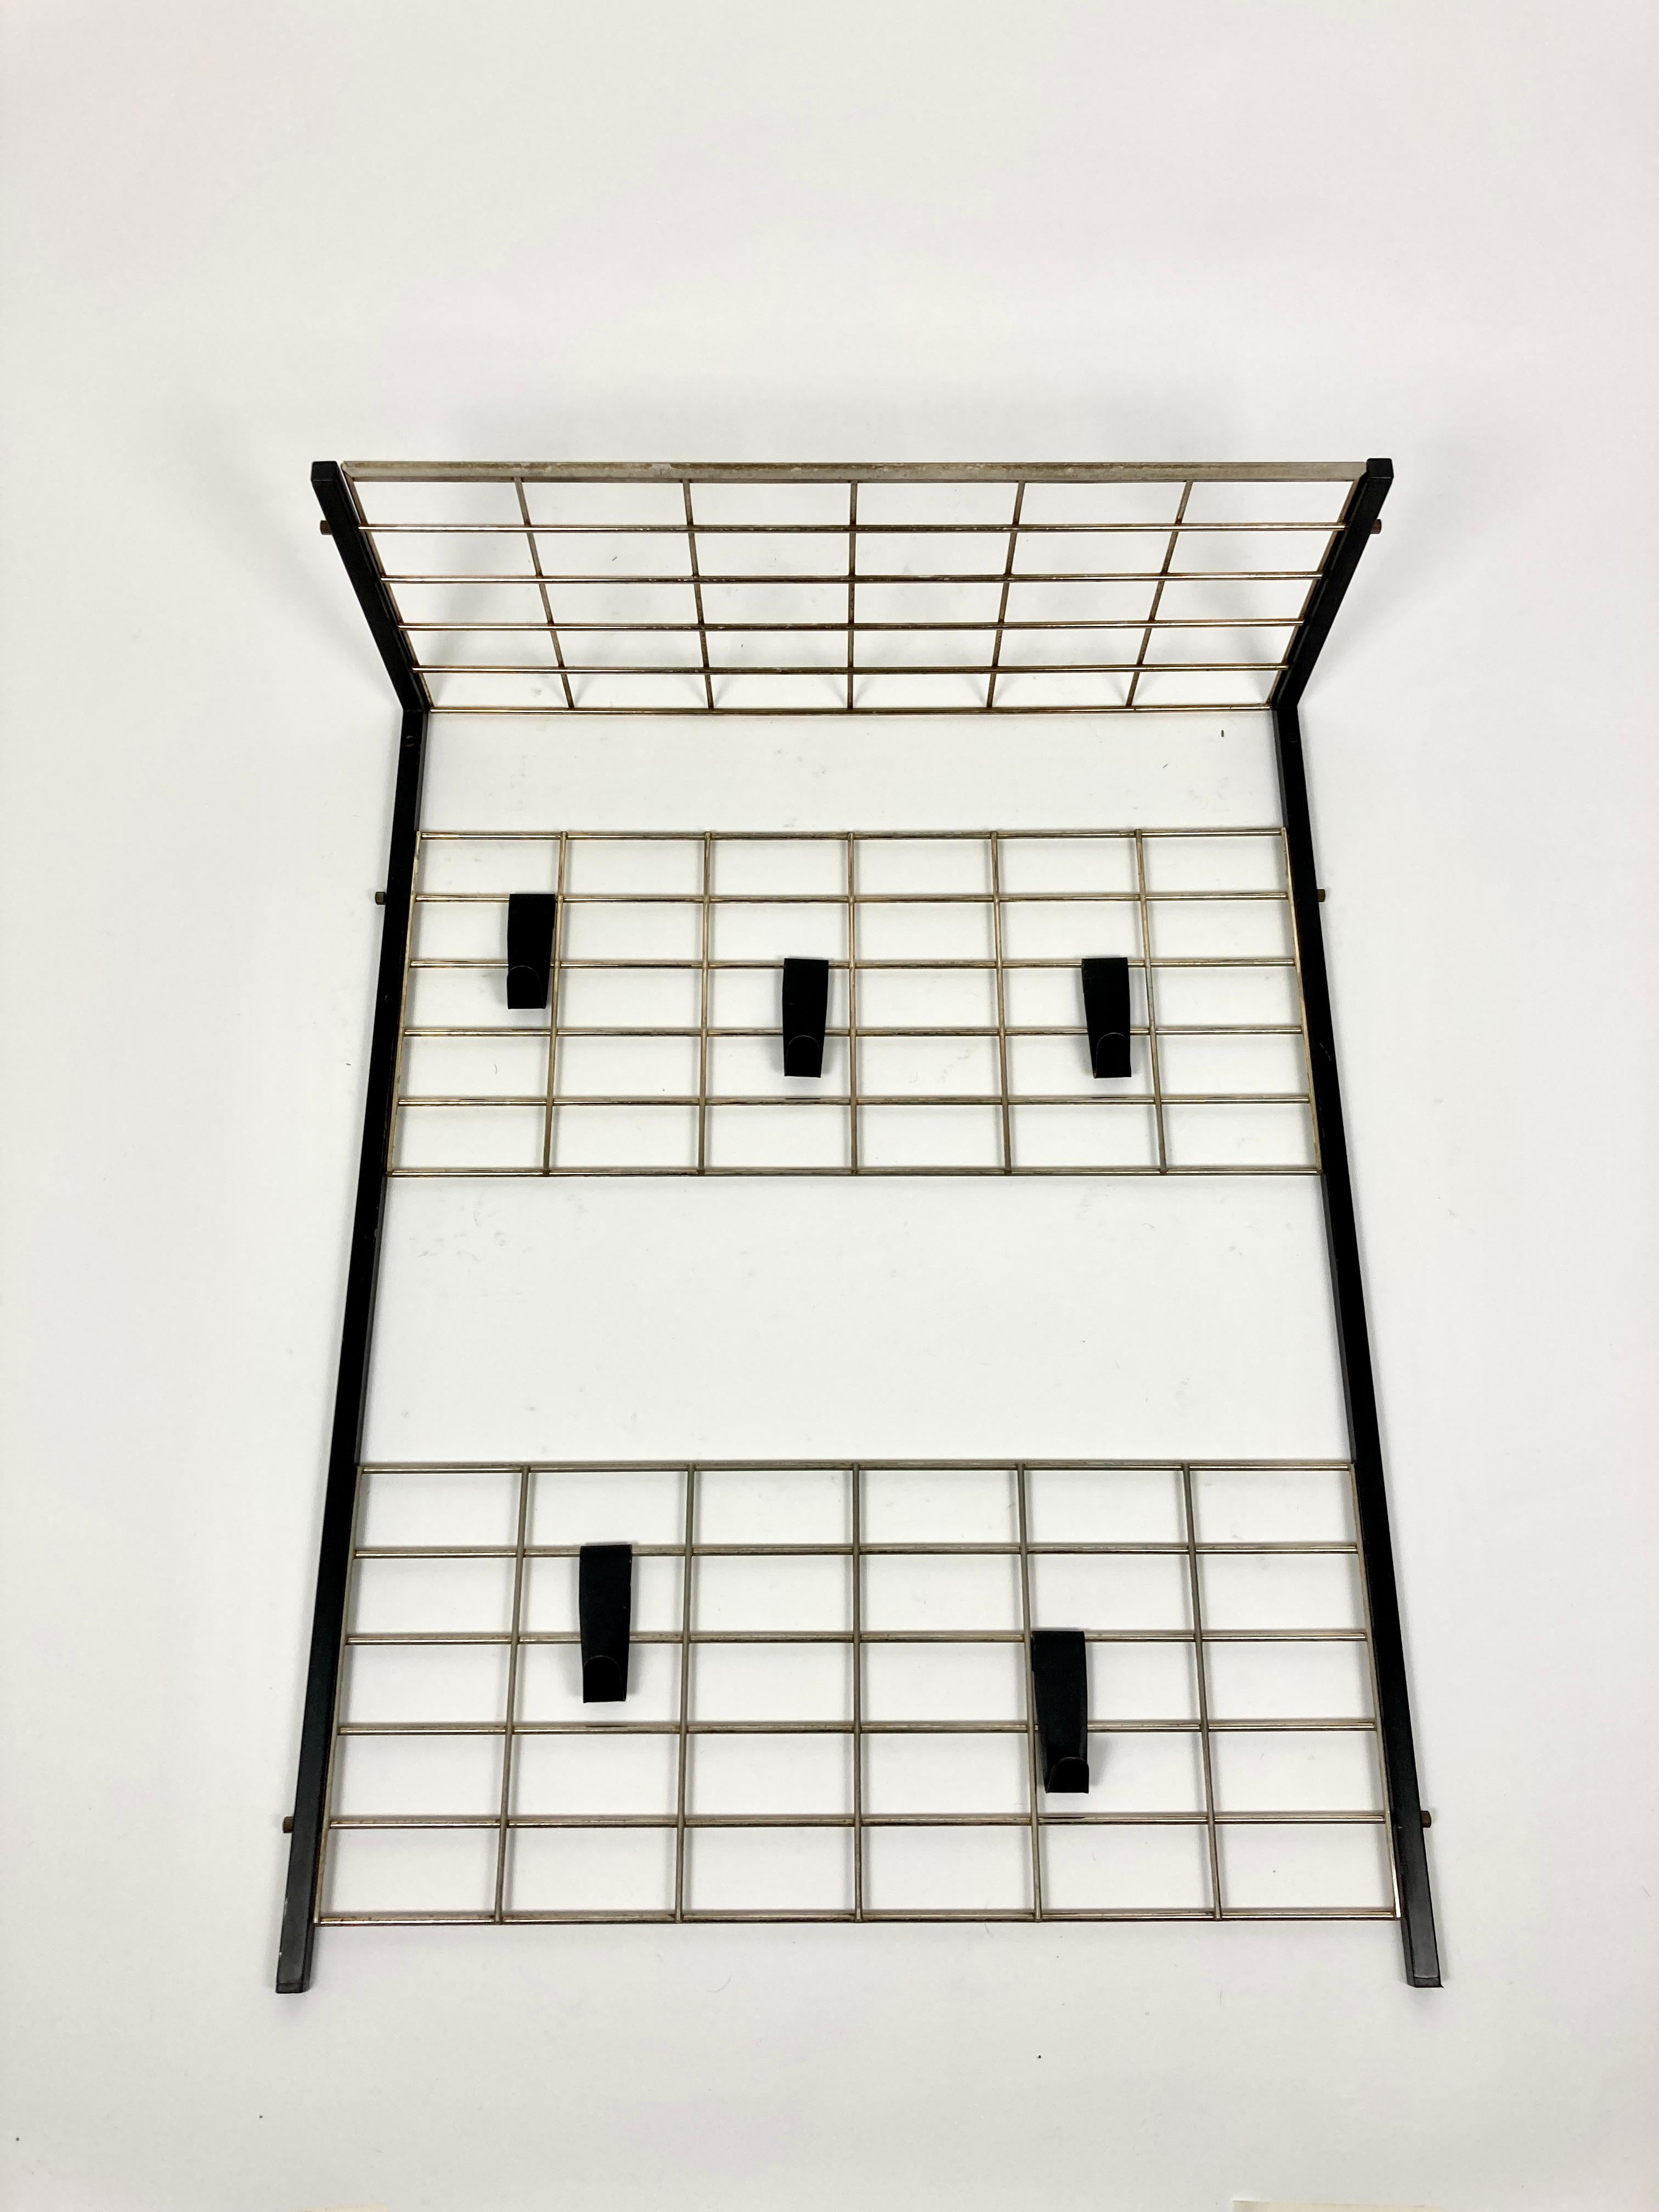 Mid-century coat rack, Netherlands, circa 1950-60 in the manner of Coen de Vries for Pilastro.

Great modernist Dutch design piece. Minimalist yet functional.

Black steel frame with brass grid sections and hat shelf. 5 black hooks which can be